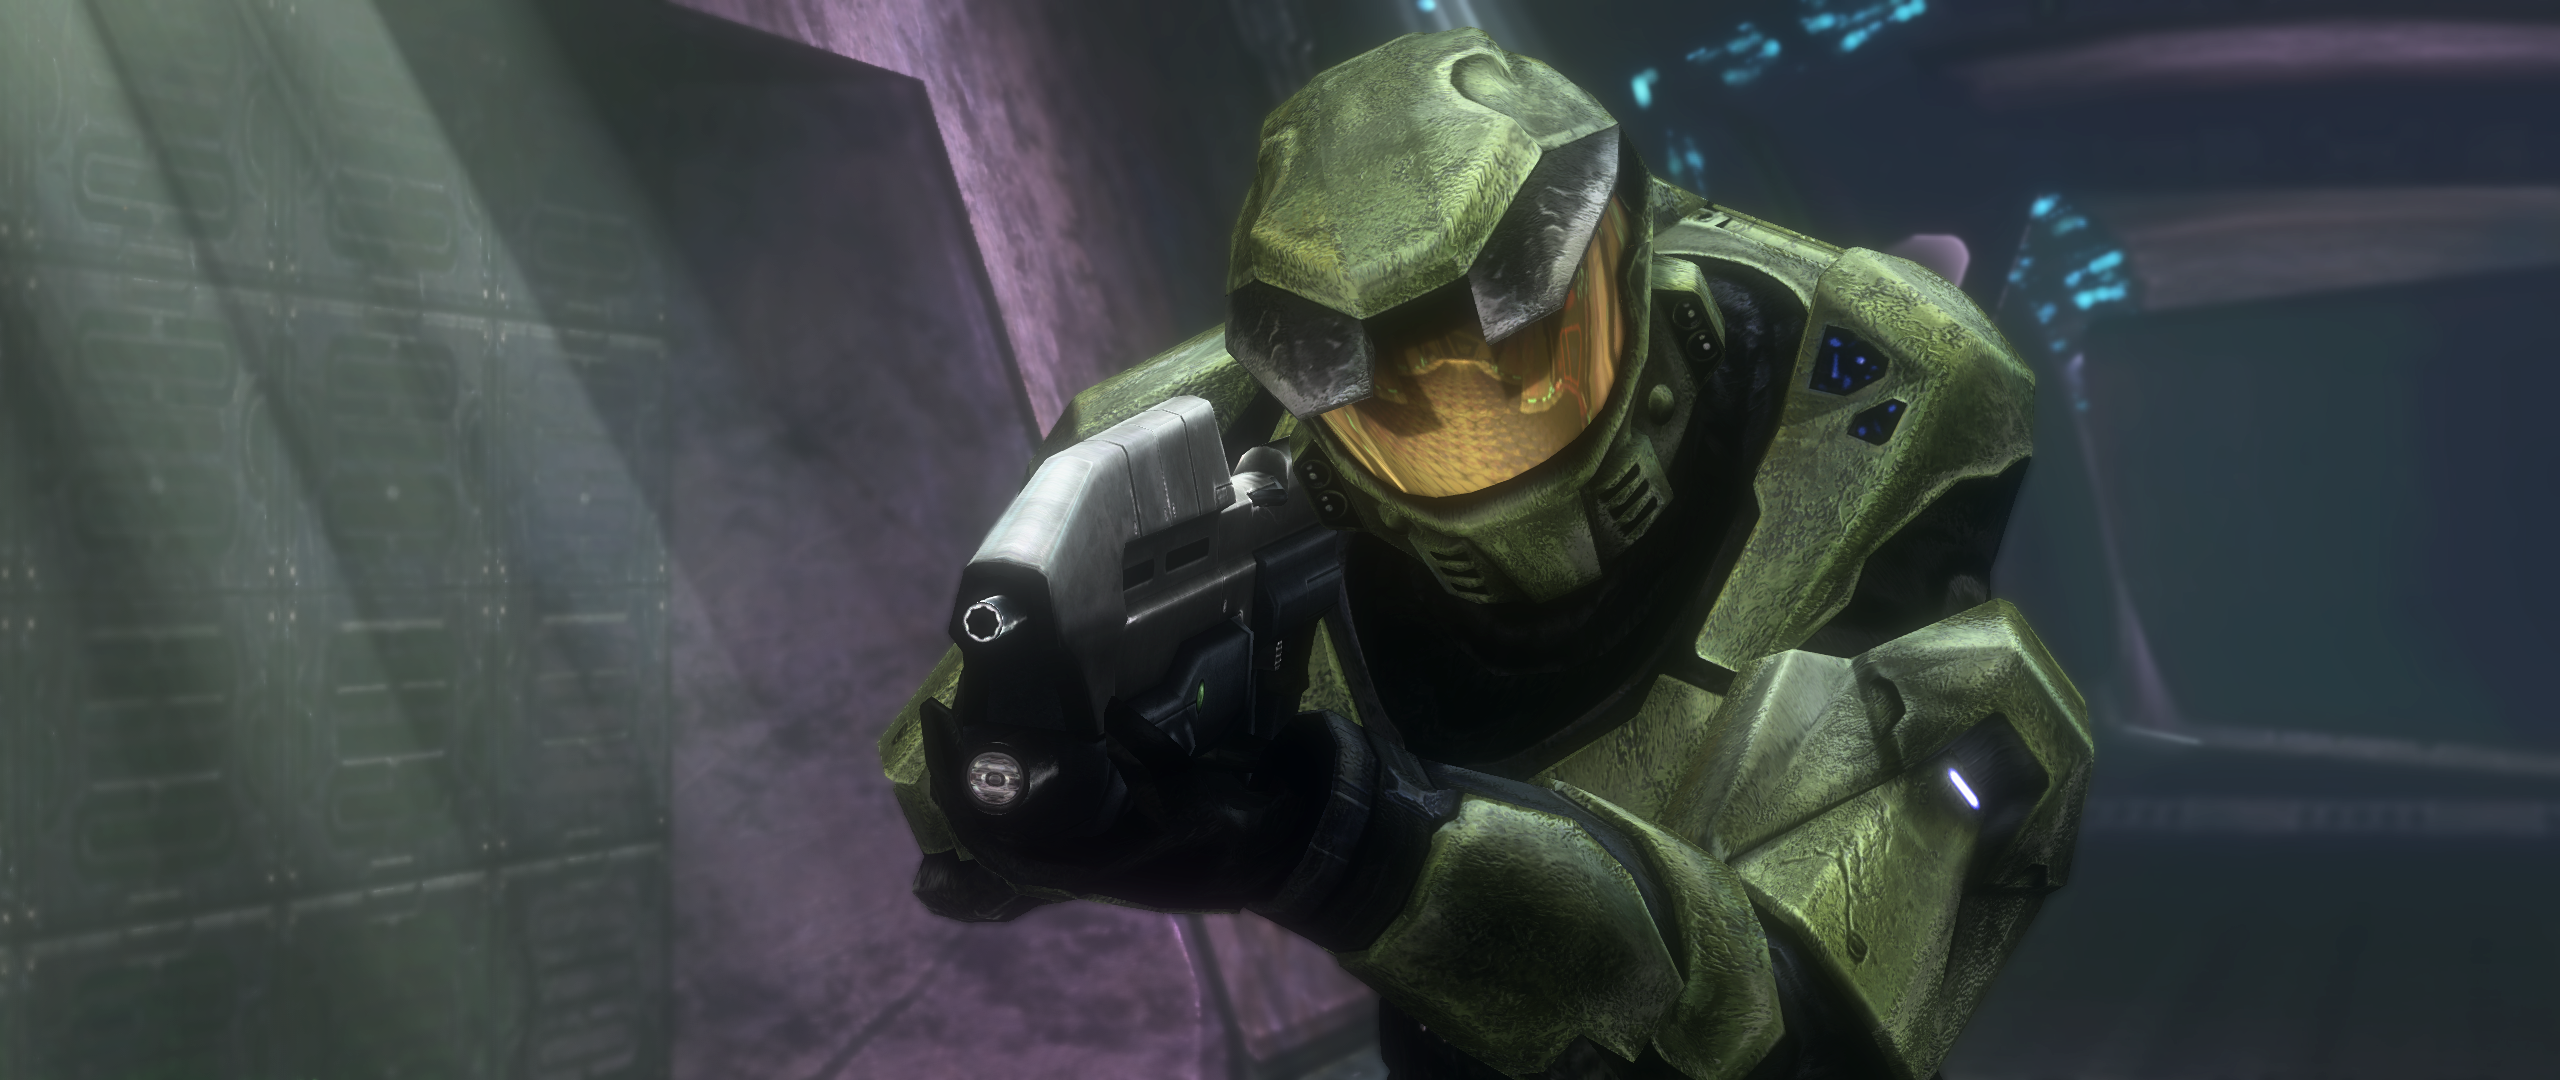 Halo master chief русификаторы. Мастер Чиф Хало 1. Halo: the Master Chief collection.